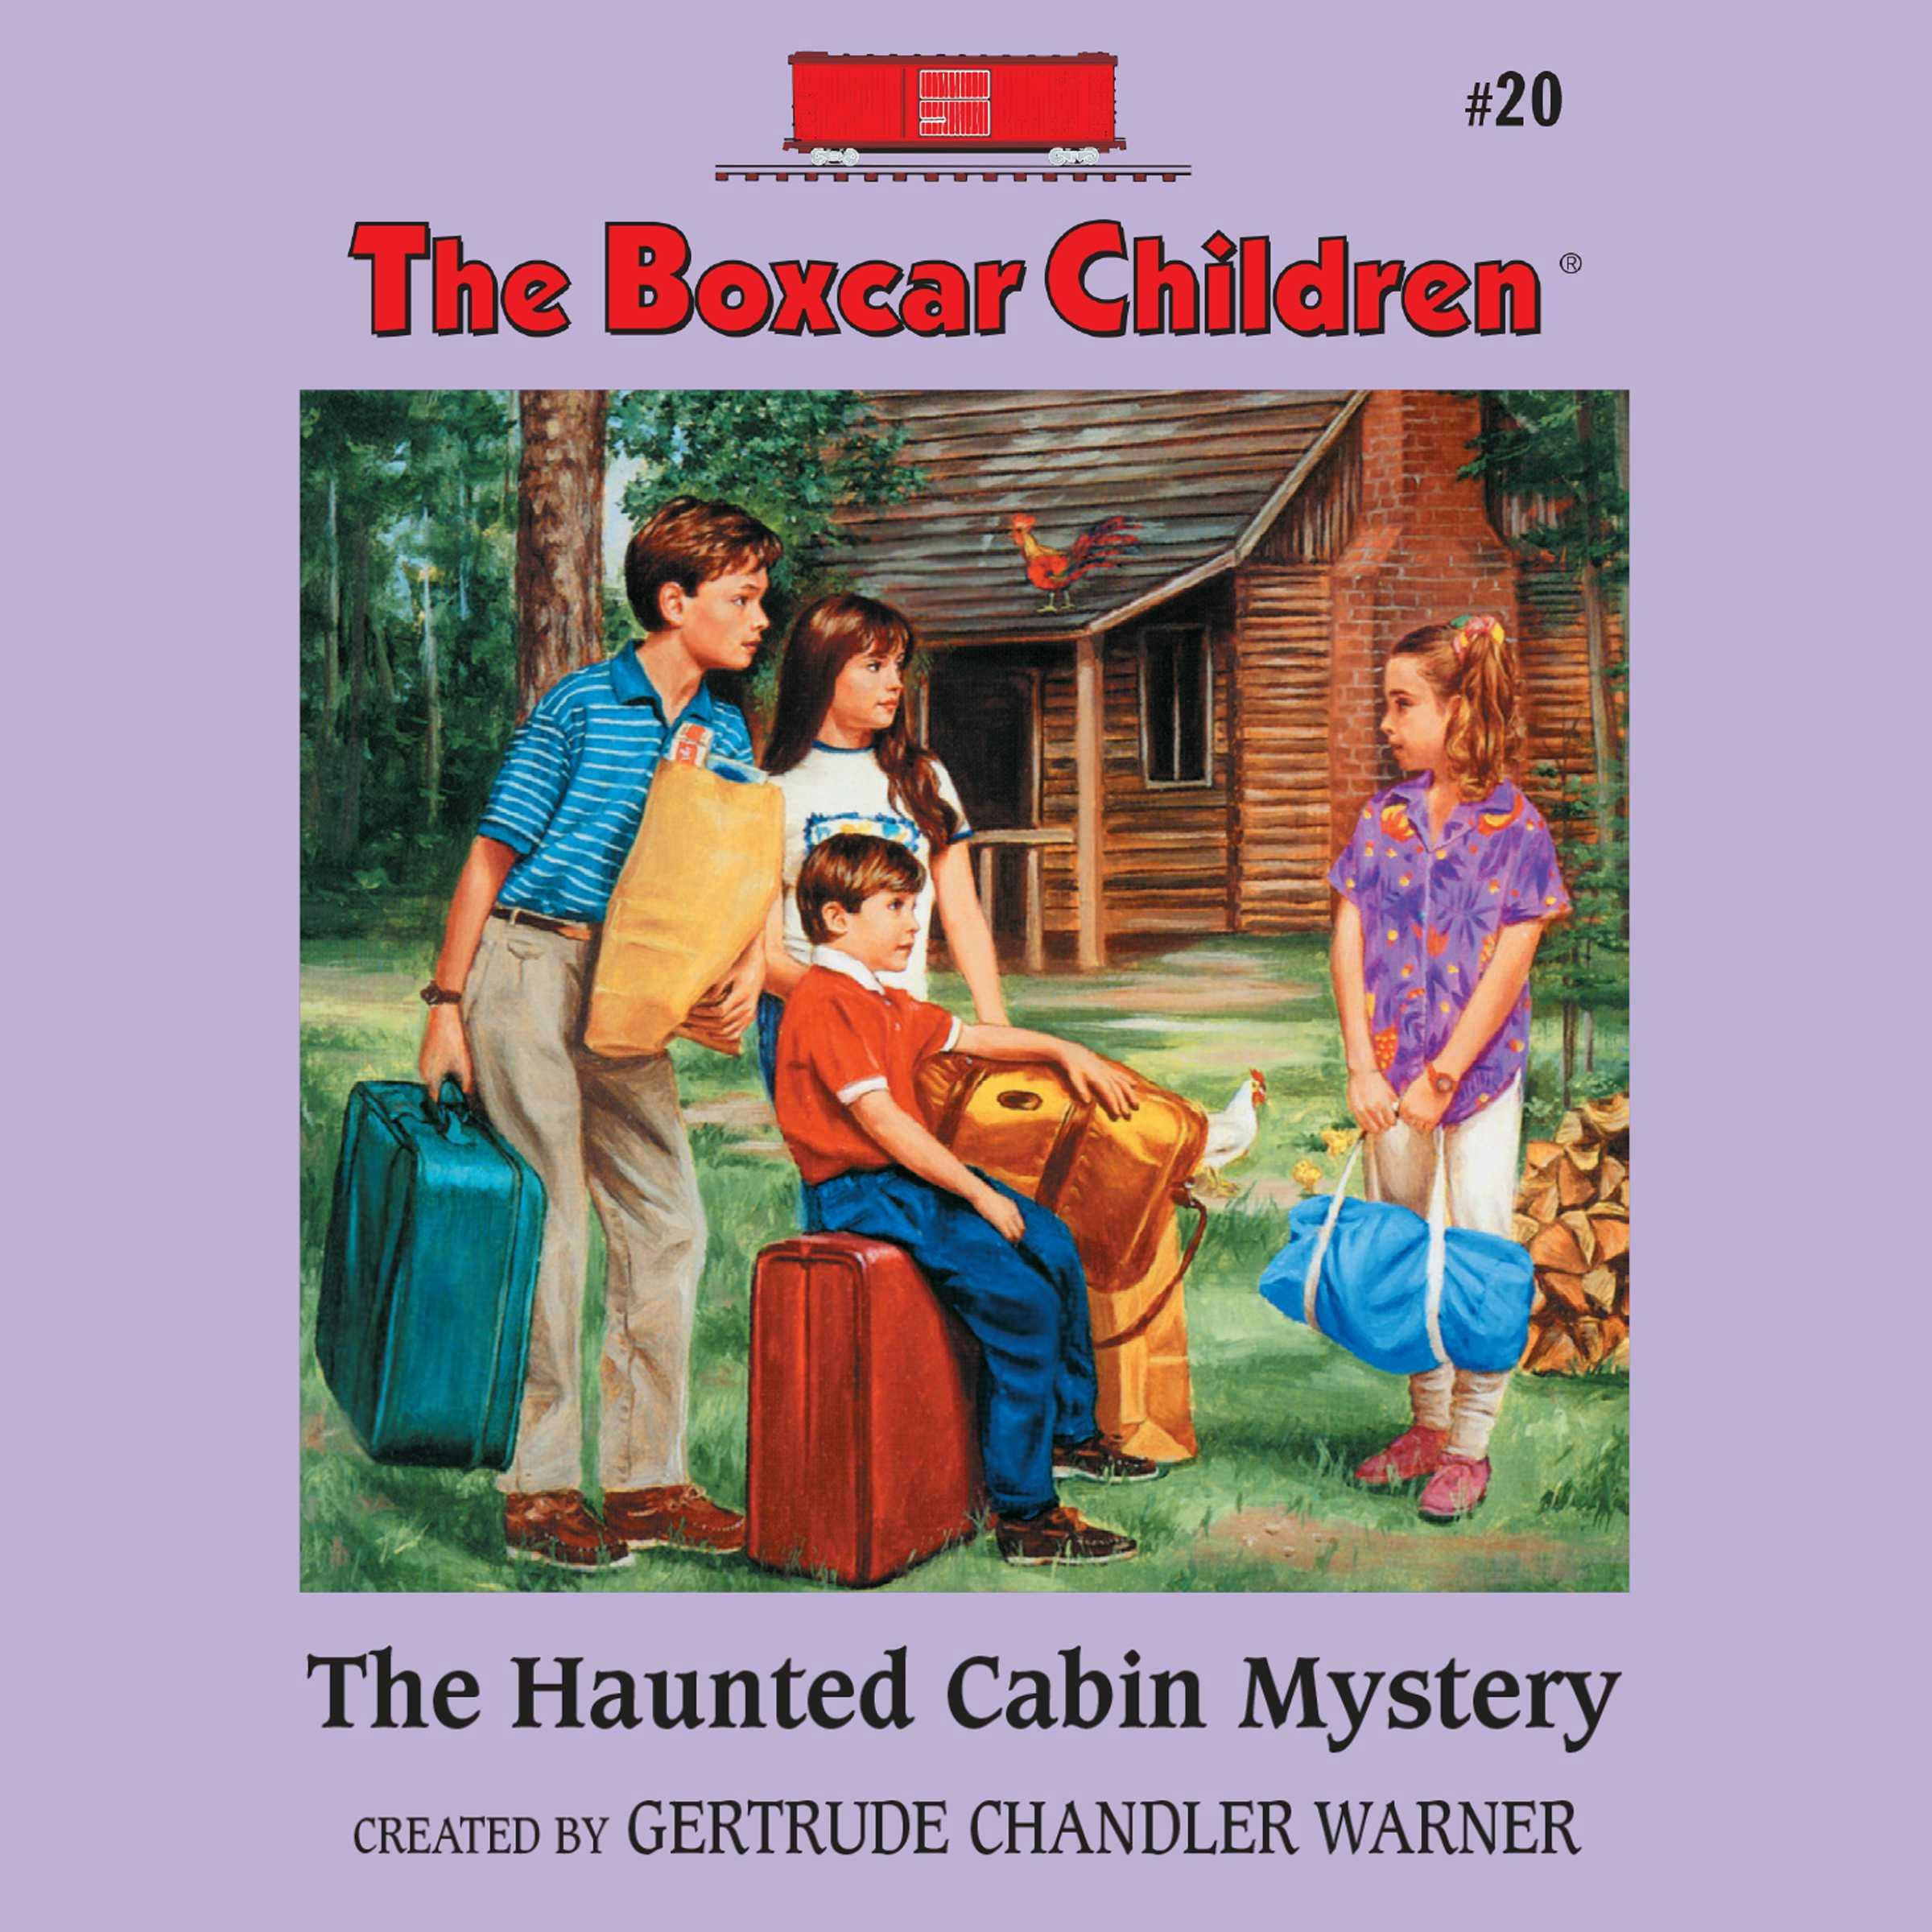 The Haunted Cabin Mystery: The Boxcar Children Mysteries, Book 20 - Gertrude Chandler Warner